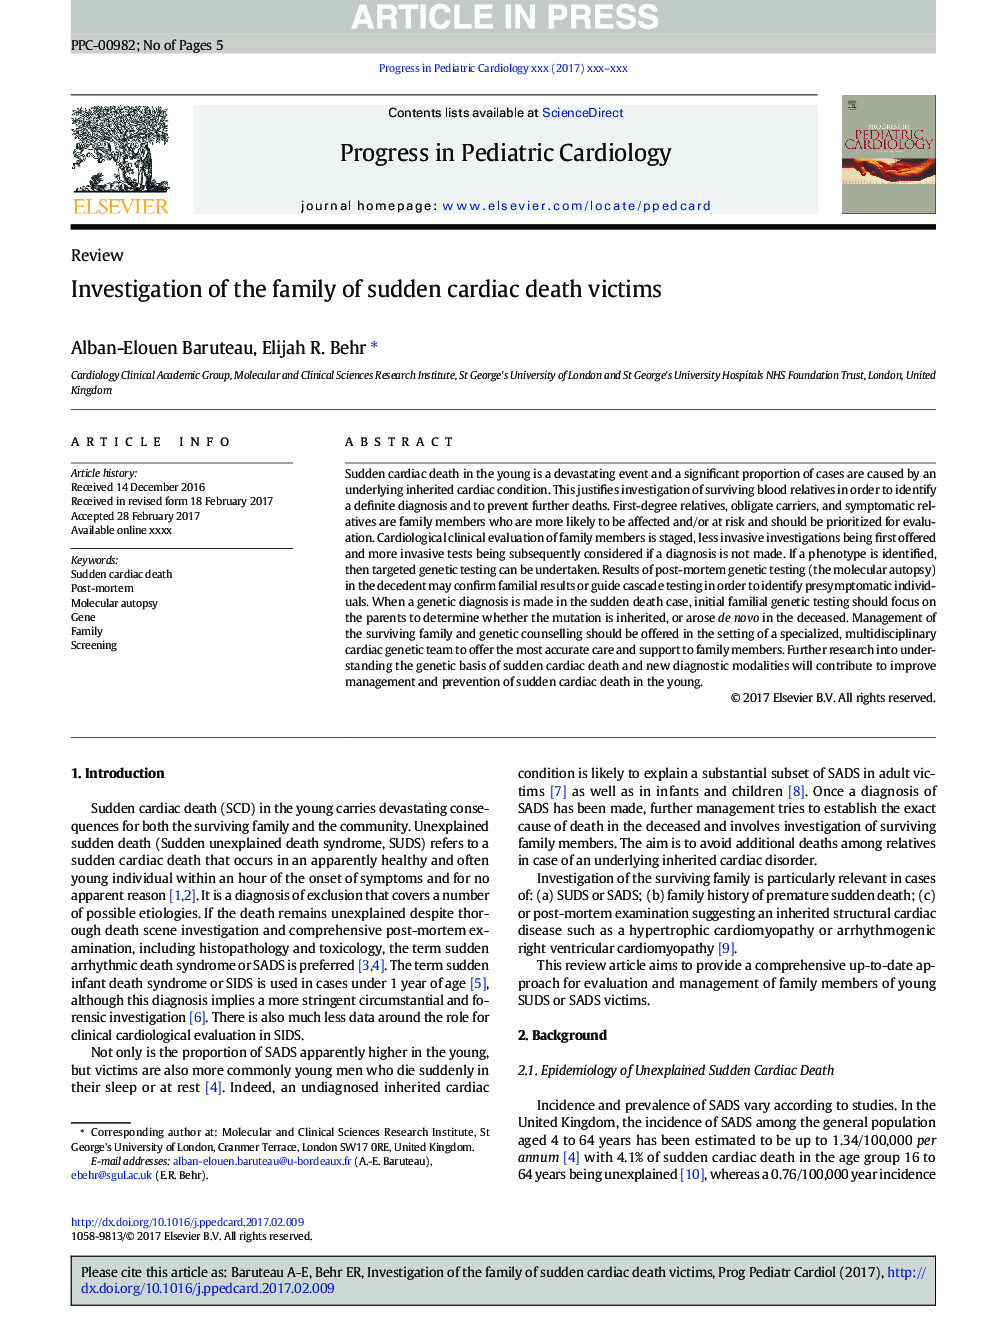 Investigation of the family of sudden cardiac death victims